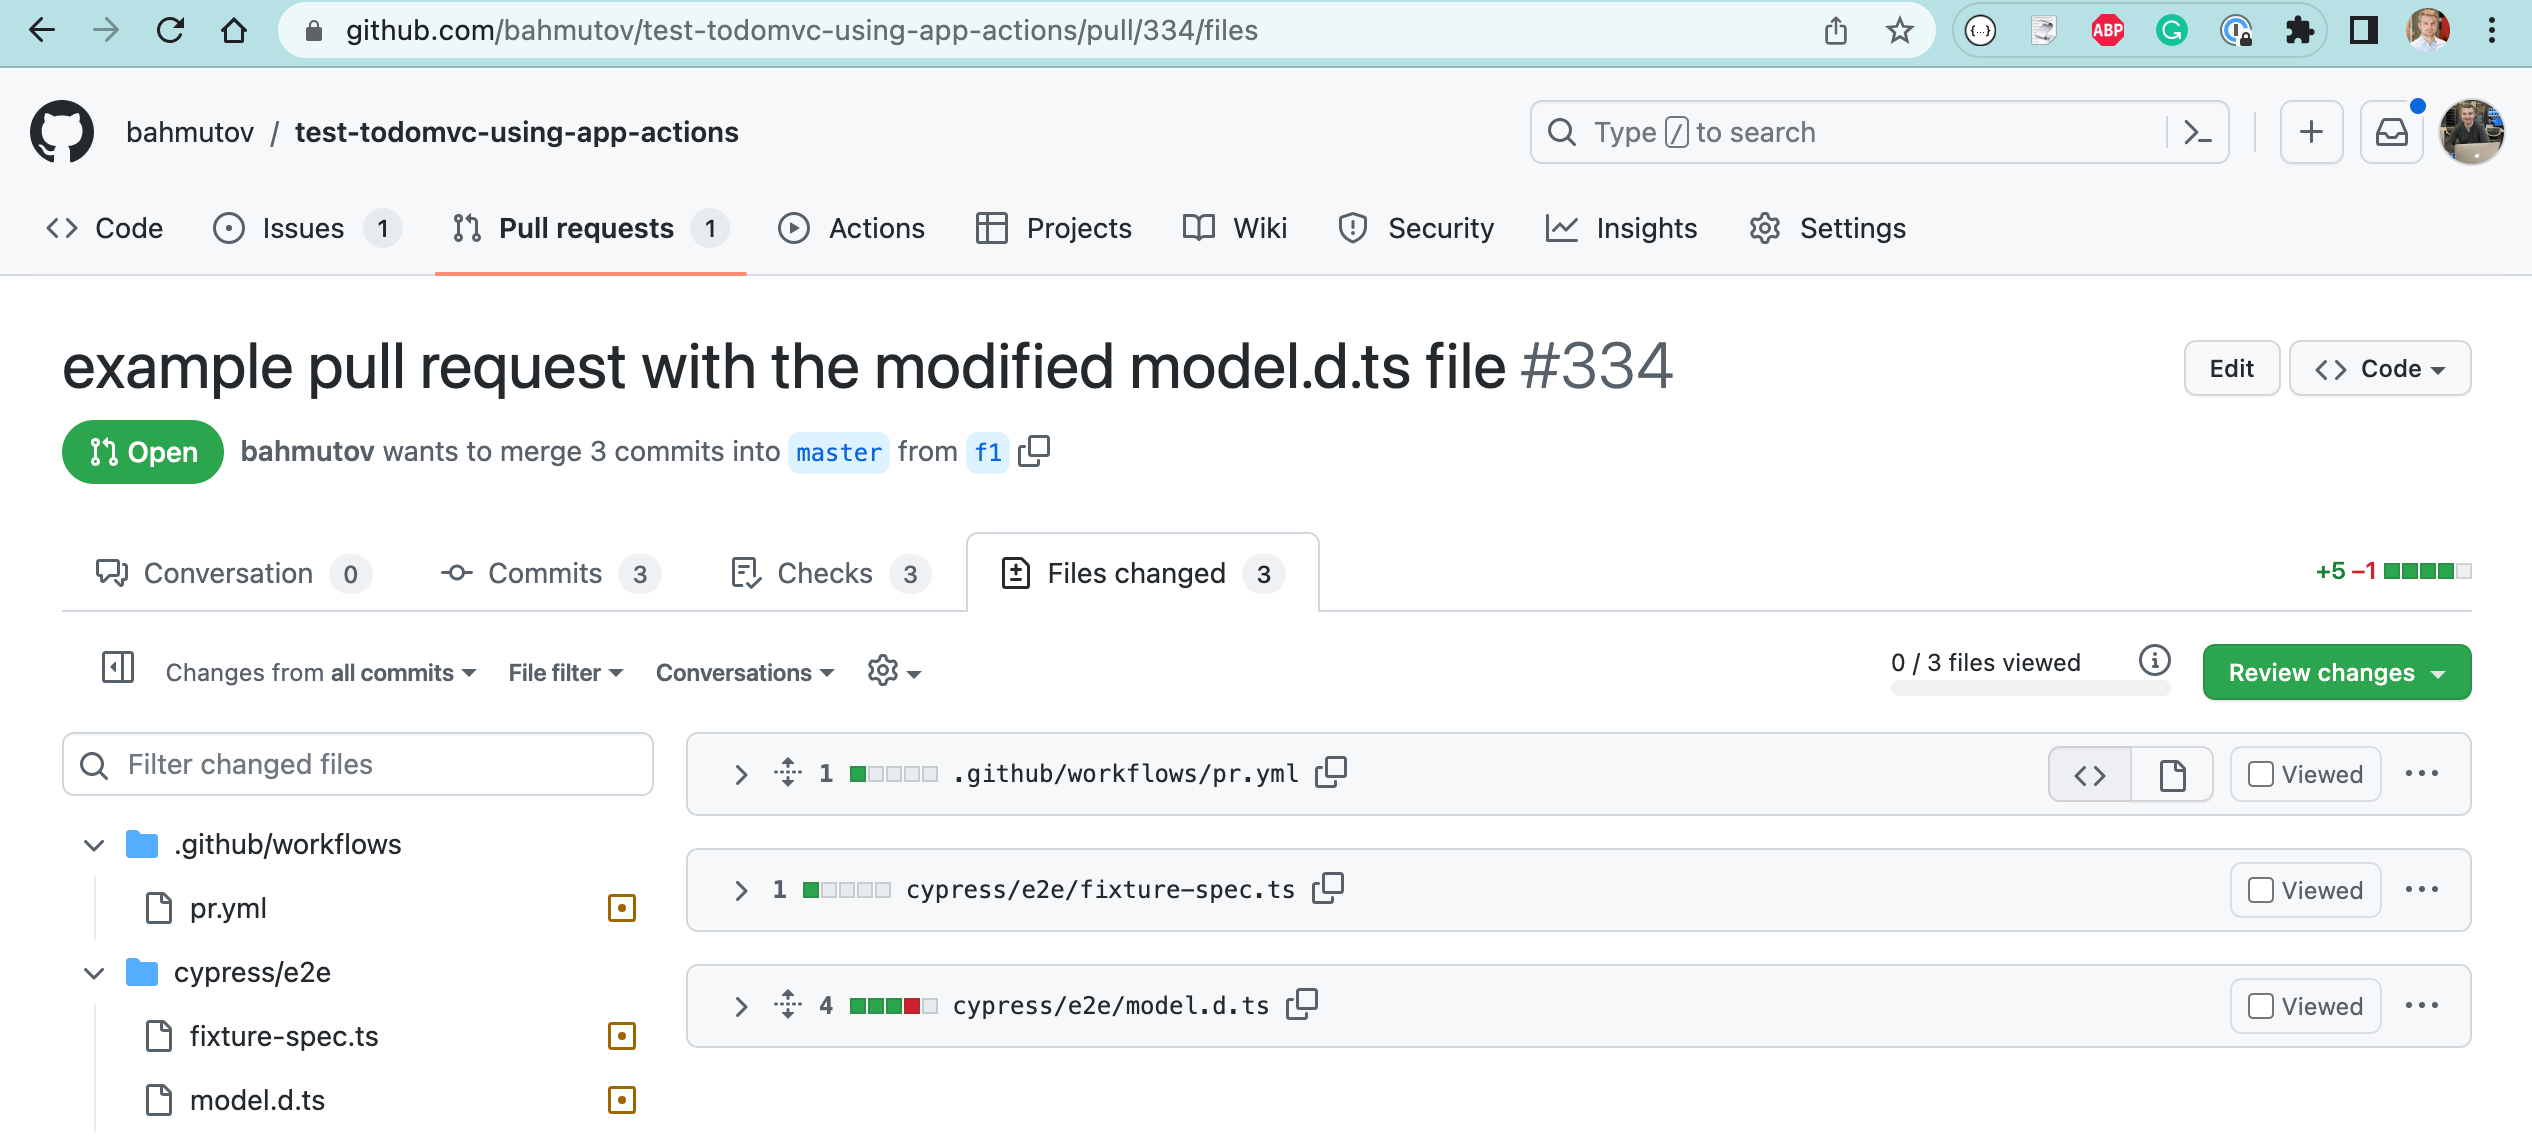 The pull request touched 3 non-spec files